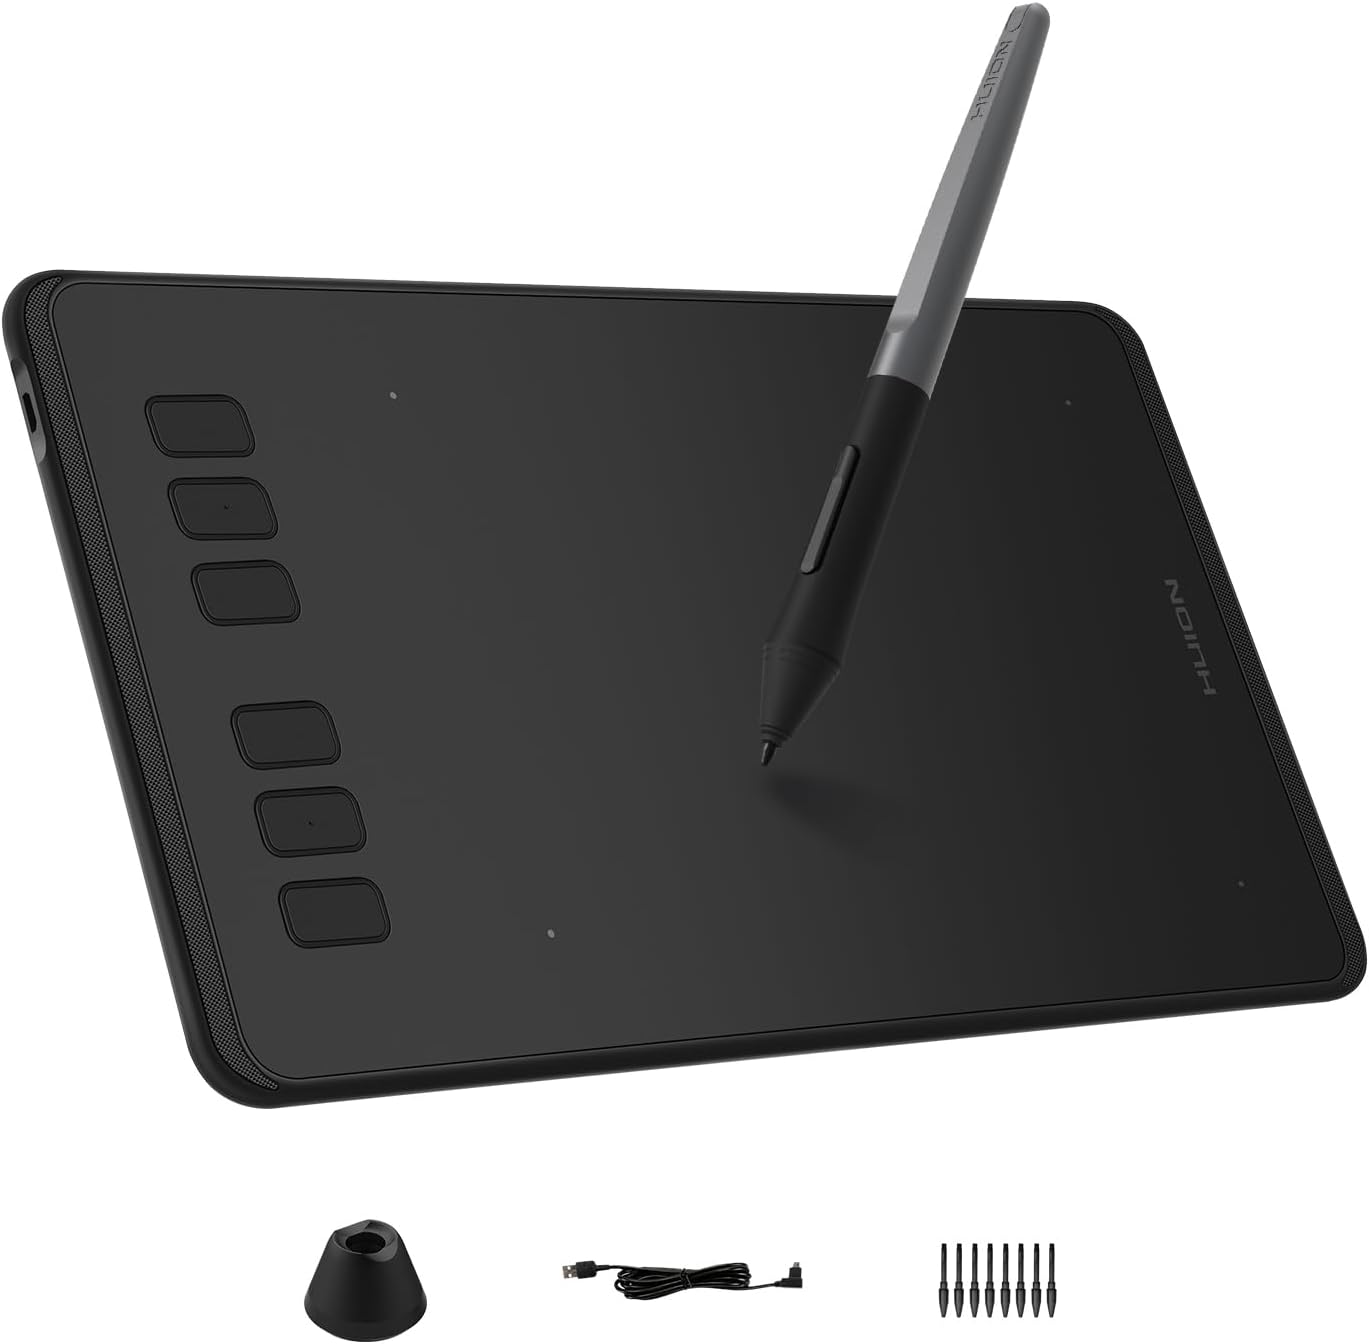 HUION Inspiroy H640P Drawing Tablet, 6x4 inch Art Tablet with Battery-Free Stylus, 8192 Pen Pressure, 6 Hot Keys, Graphics Tablet for Drawing, Writing, Design, Teaching, Work with Mac, PC & Mobile 1